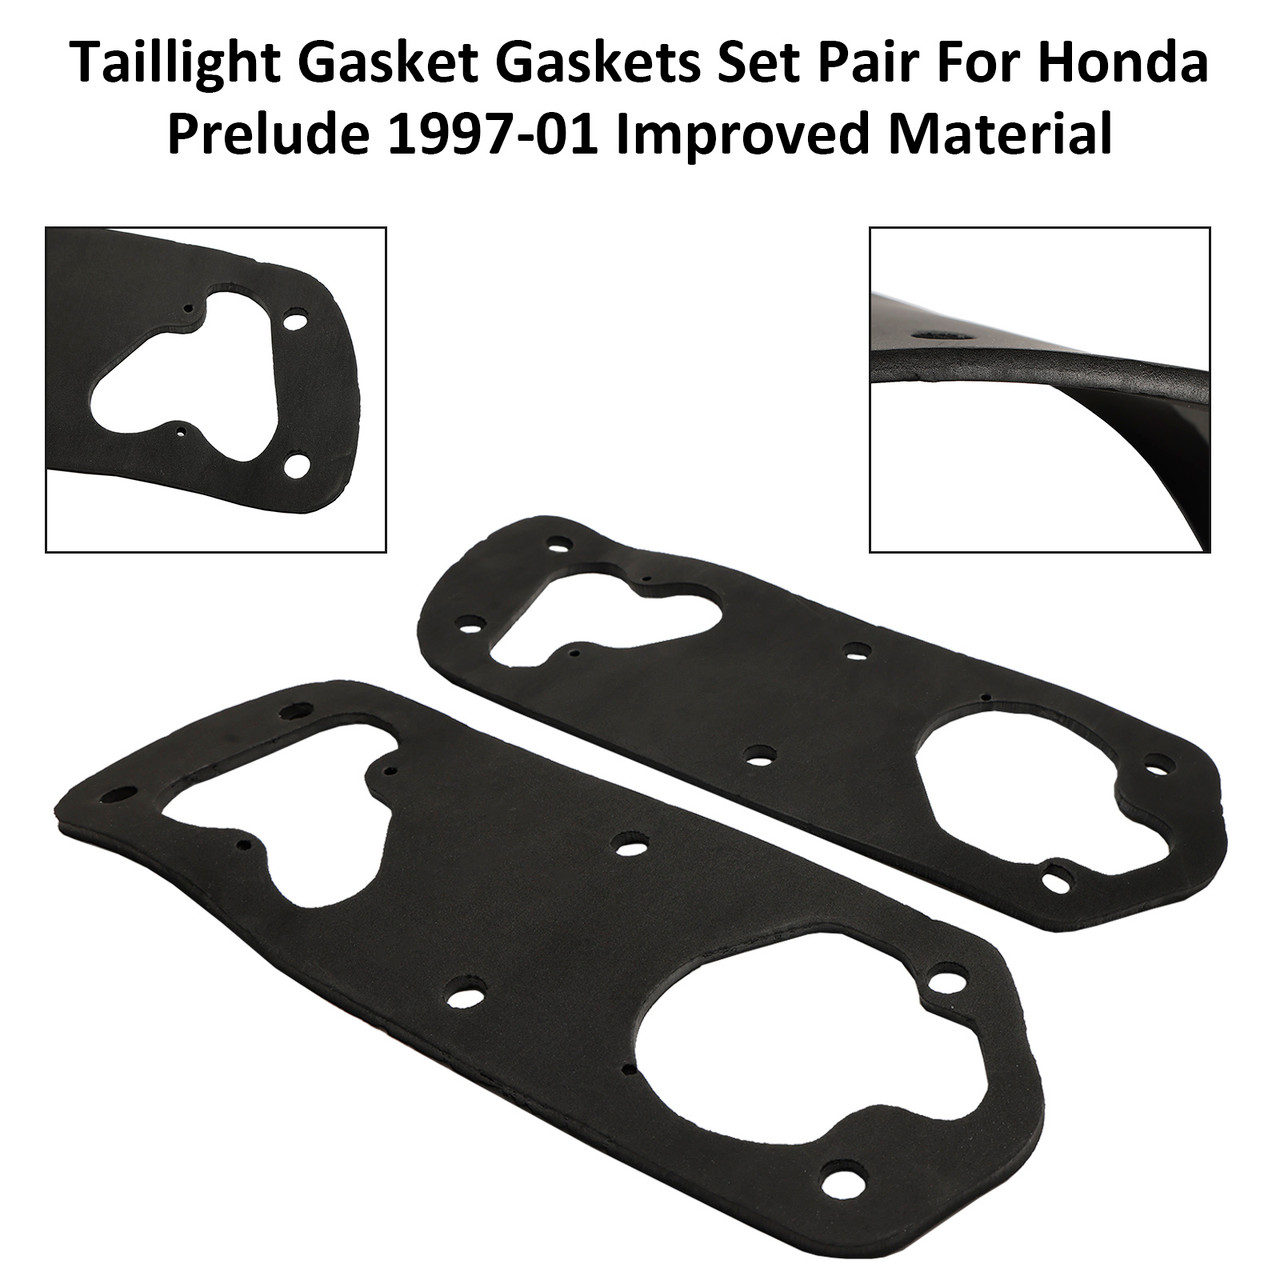 Taillight Gasket Gaskets Set Pair For Honda Prelude 1997-01 Improved Material